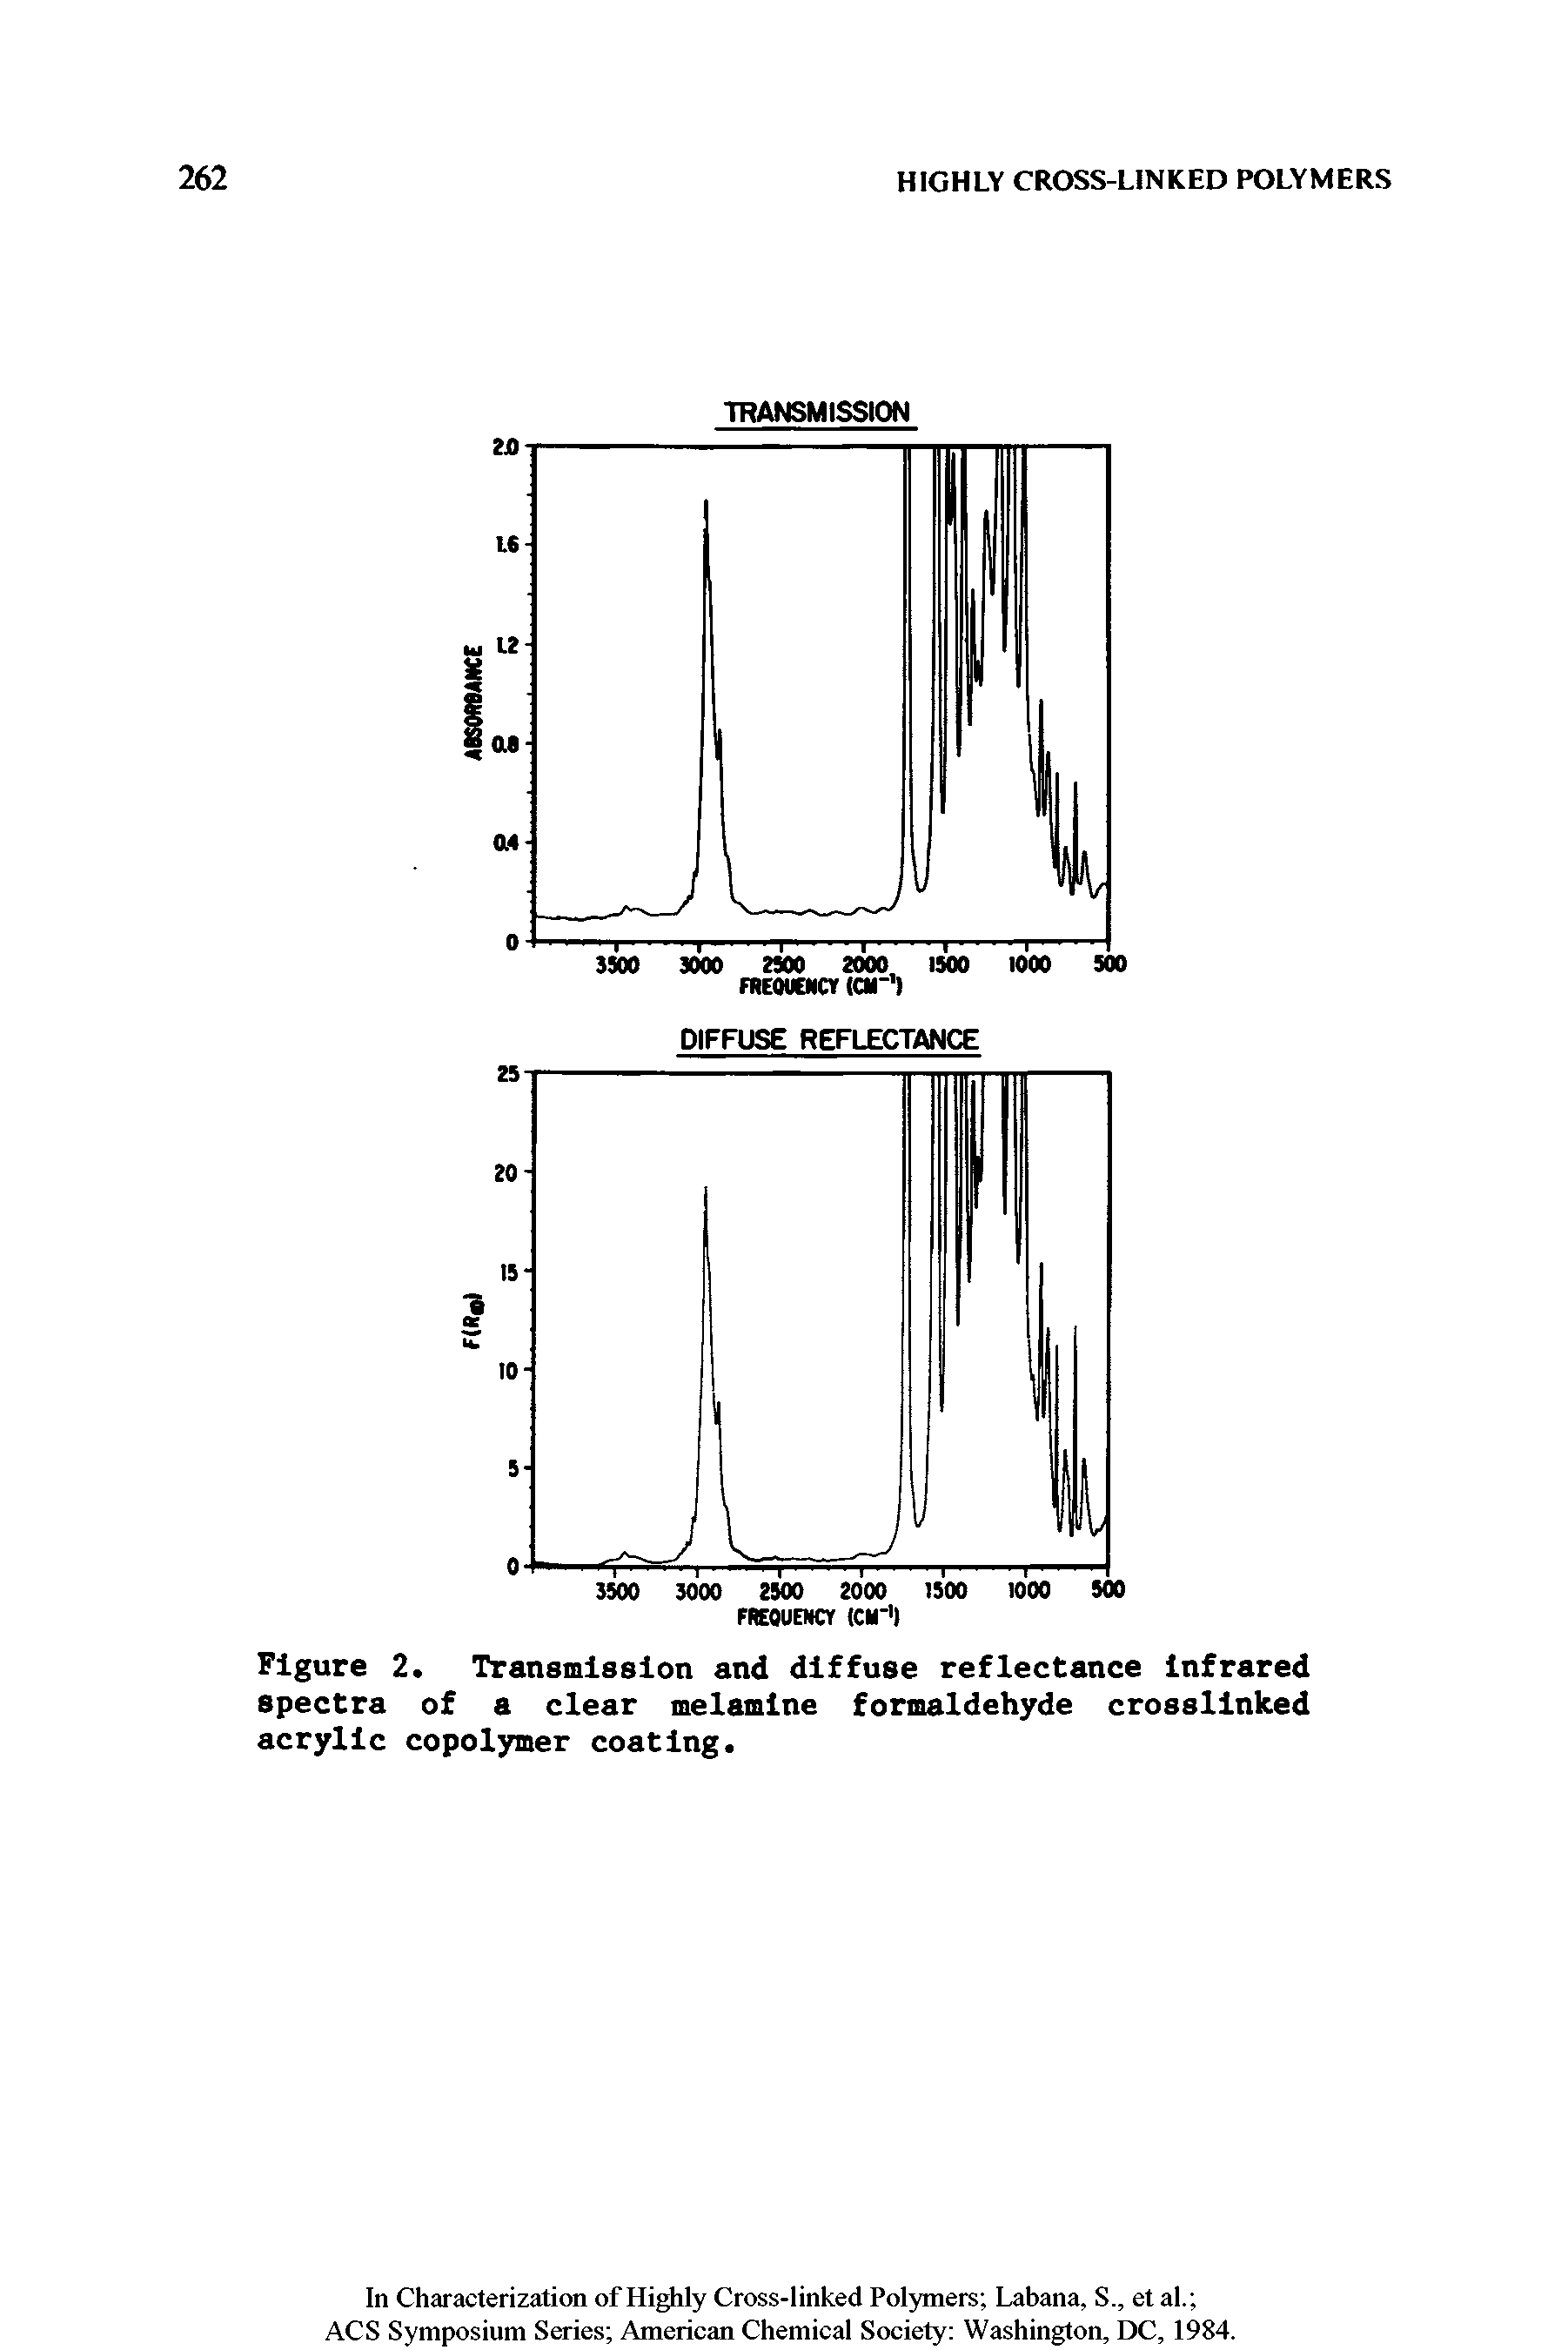 Figure 2. Transmission and diffuse reflectance Infrared spectra of a clear melamine formaldehyde crossllnked acrylic copolymer coating.